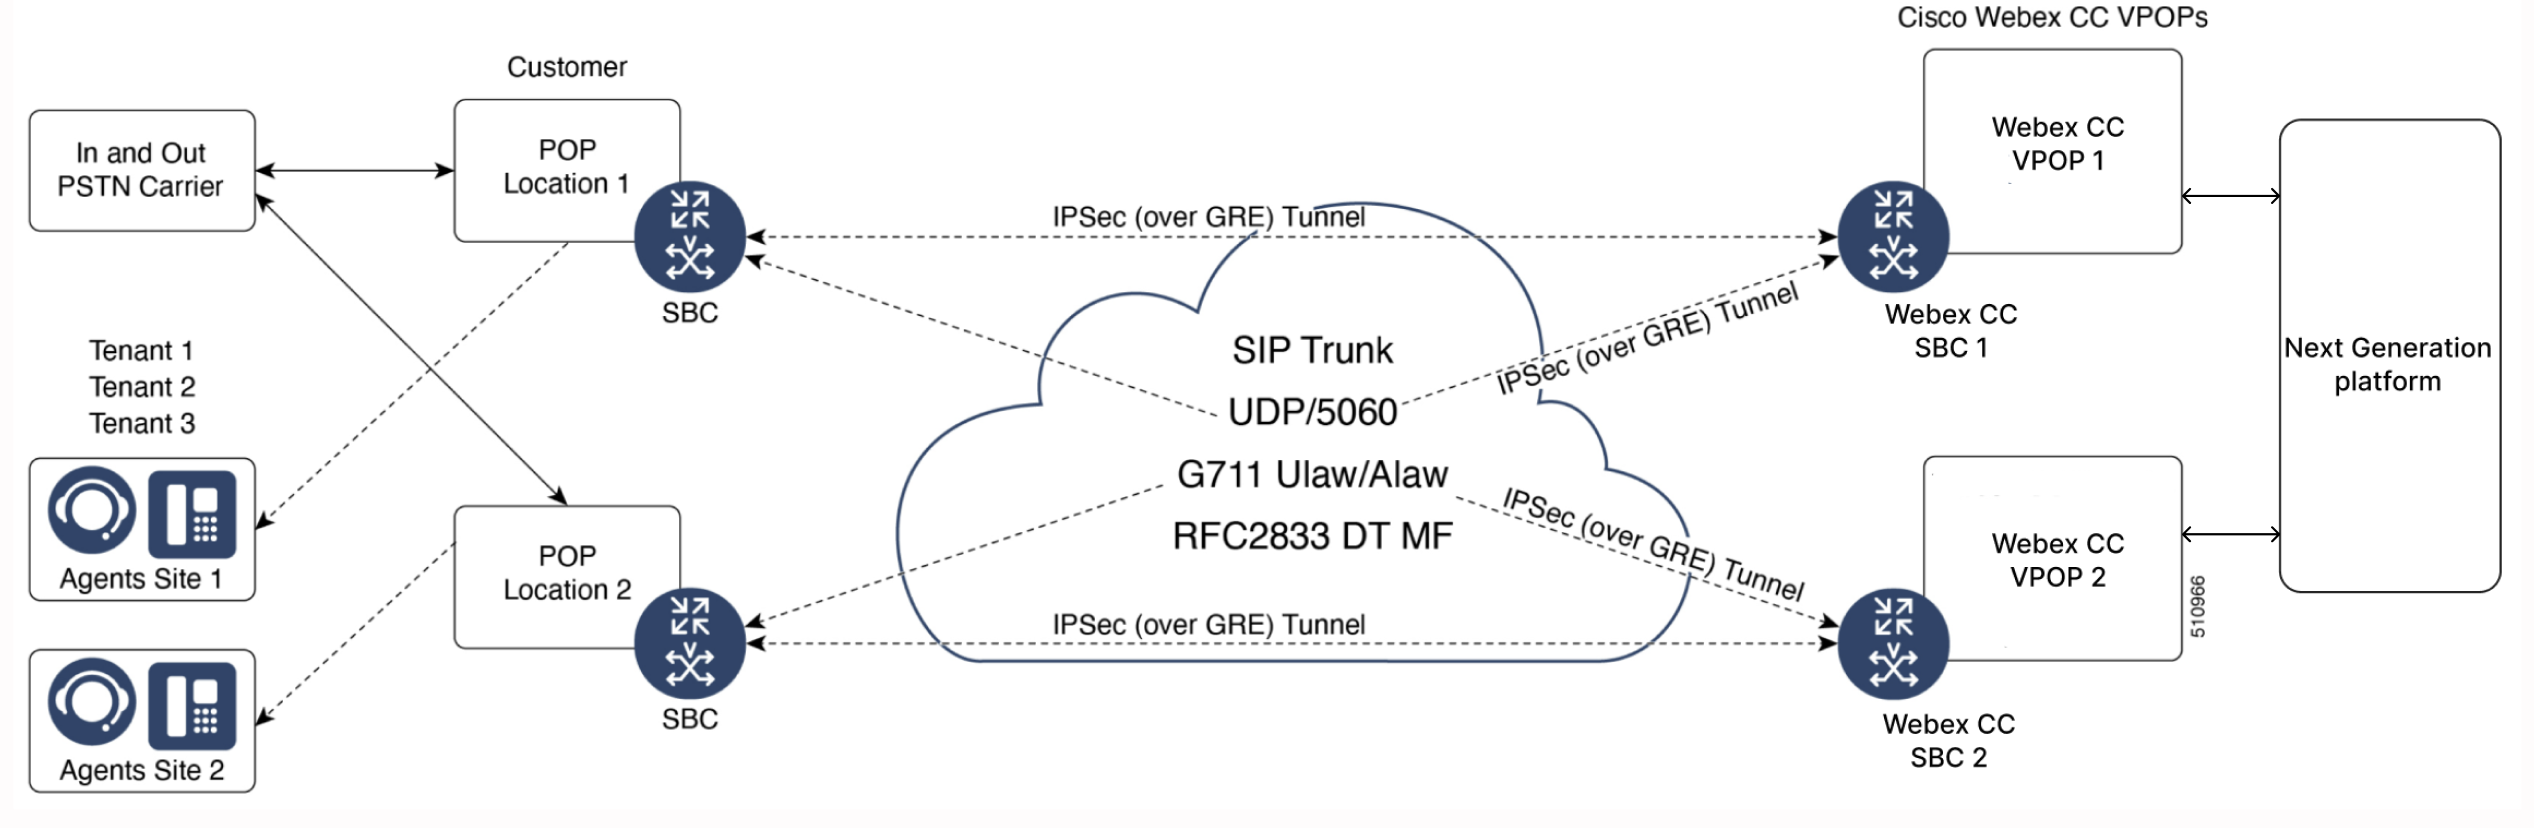 Typical IPsec or IPSec over GRE Tunnel